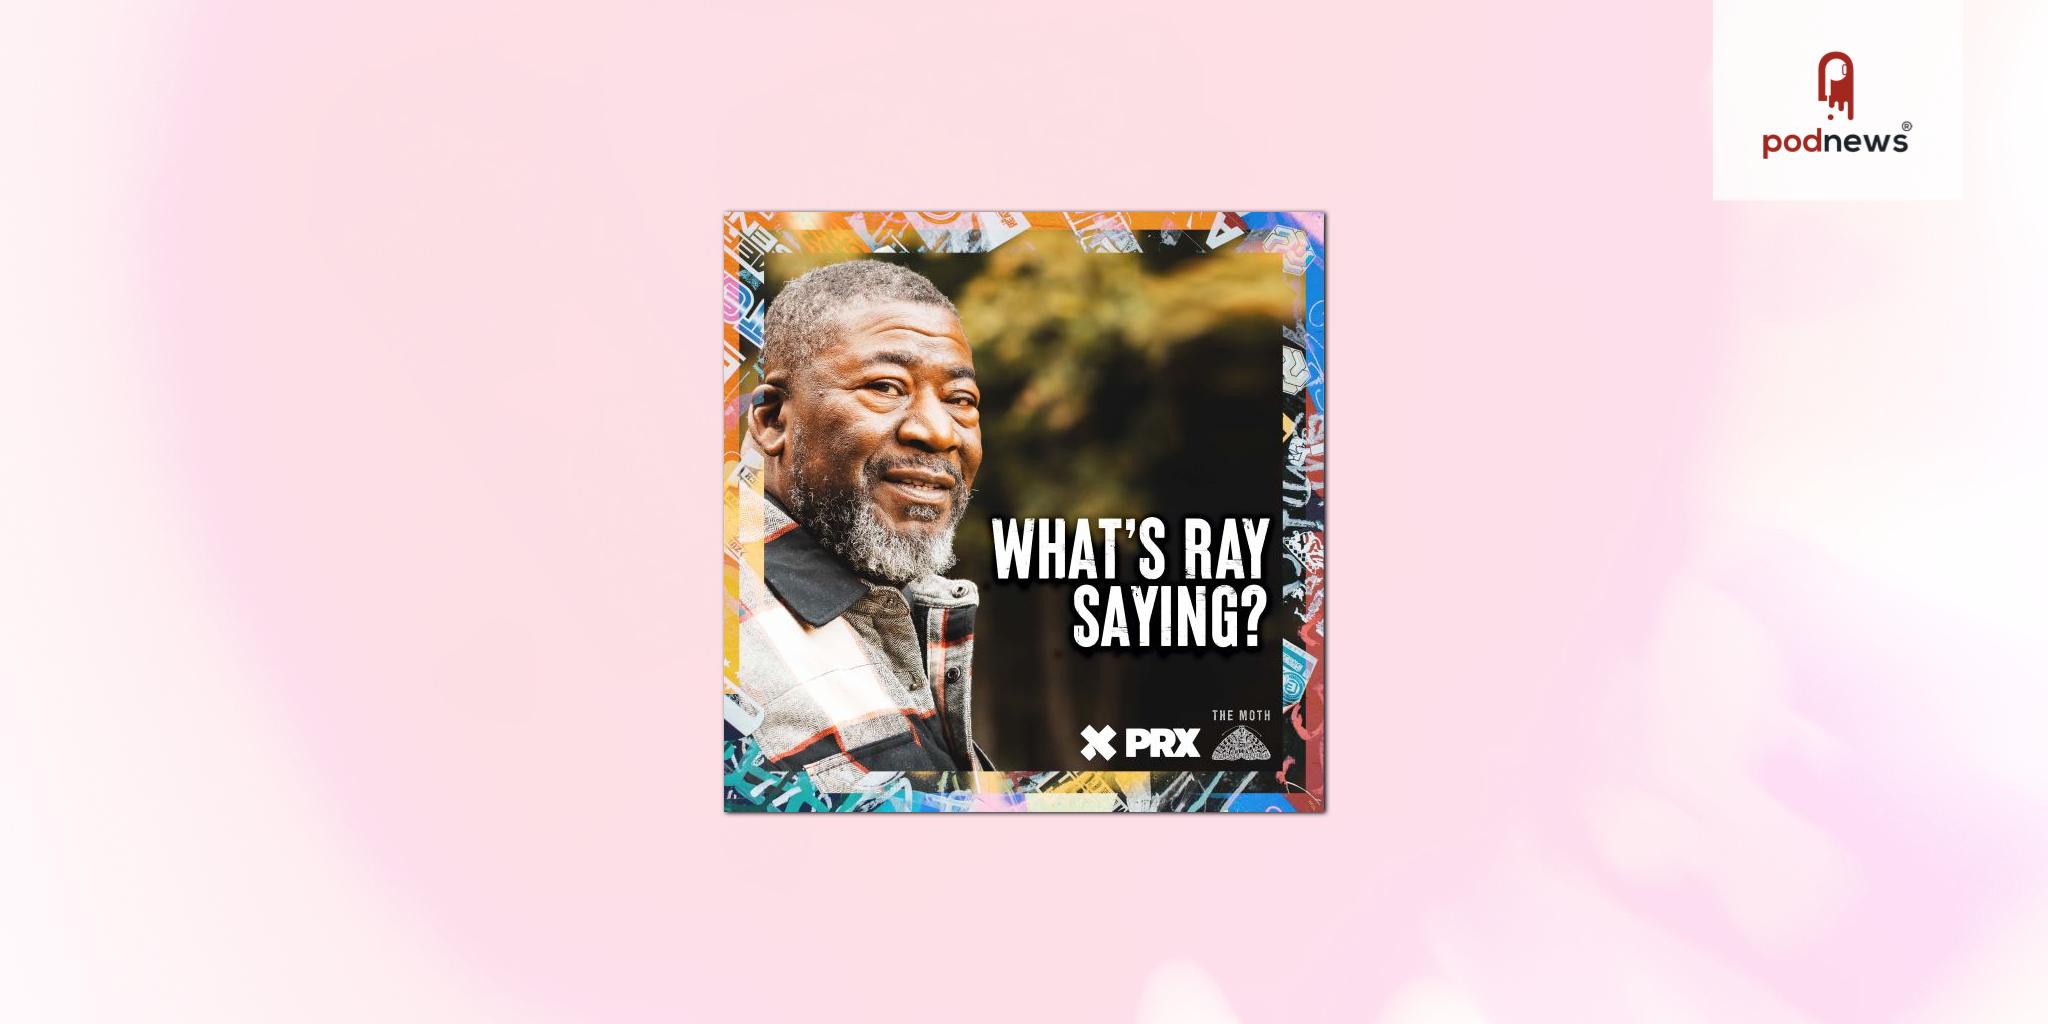 PRX and The Moth Collaborate to Present New Episodes of the “What’s Ray Saying?” Podcast